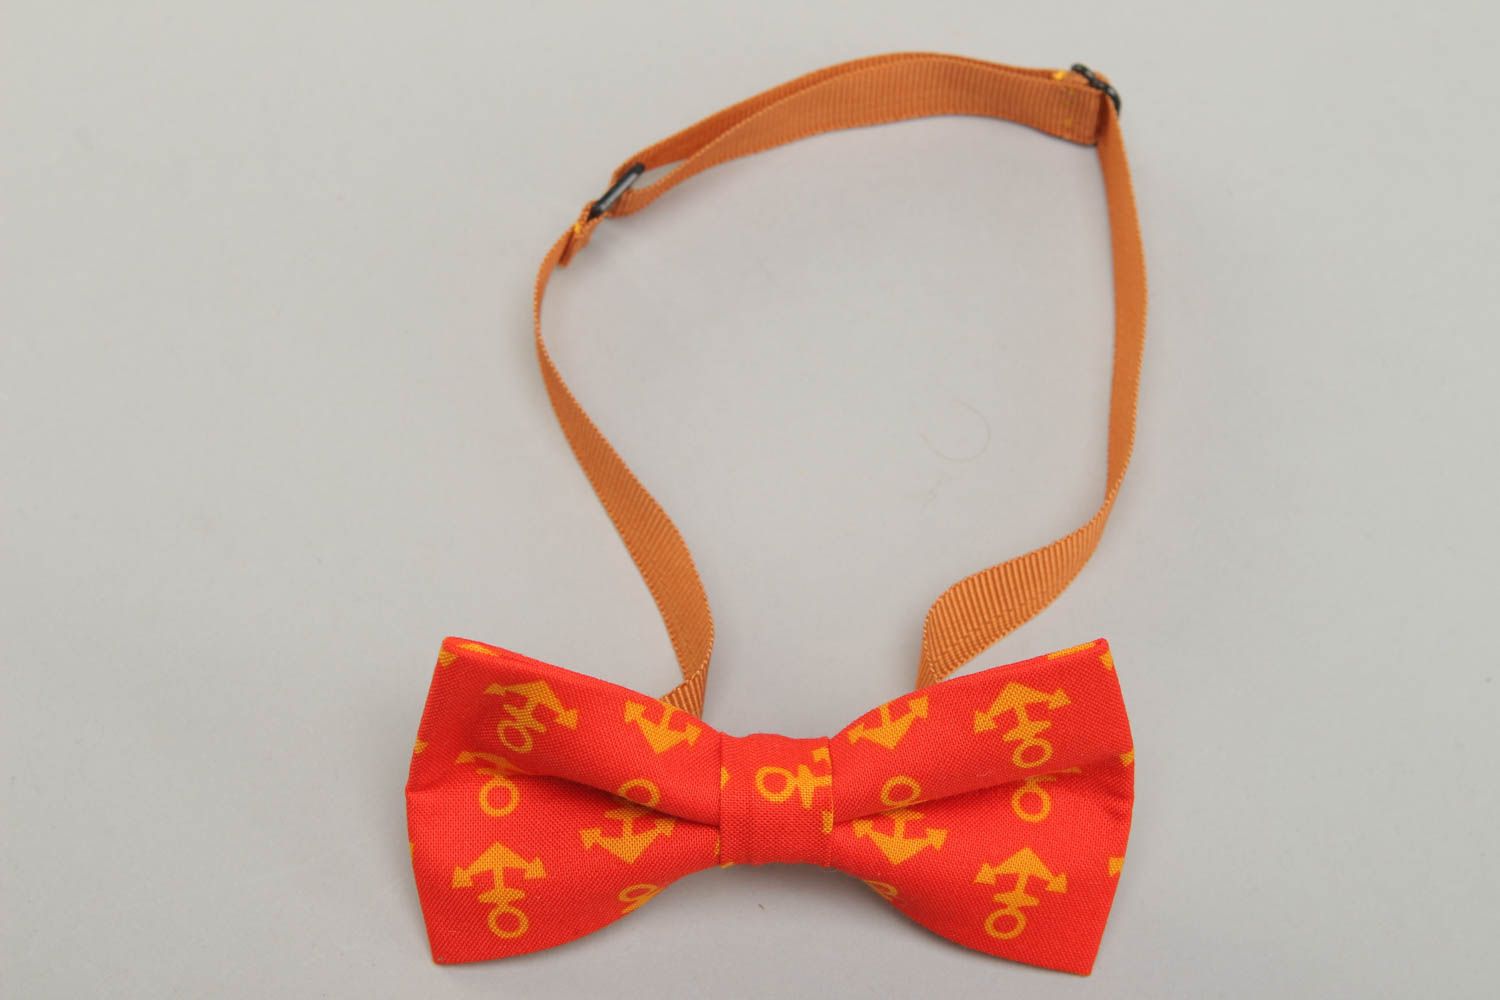 Handmade fabric bow tie with anchors pattern photo 1